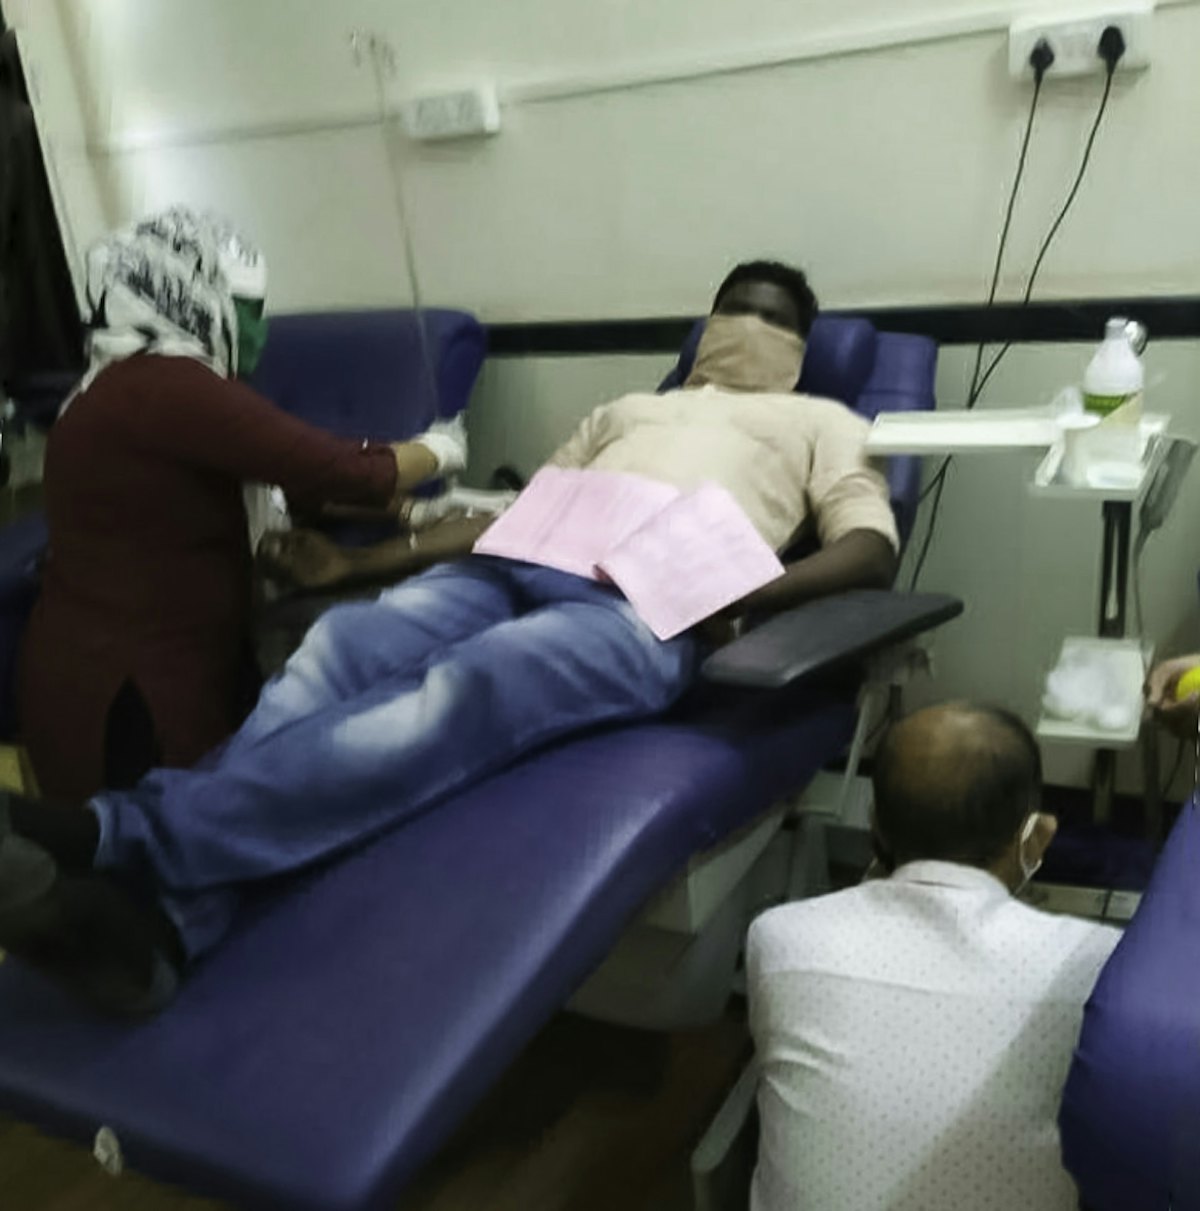 In response to an urgent call from the Health Minister of Maharashtra for blood donations, the Baha’i Local Spiritual Assembly of Maleagaon rallied many people to respond. The Local Assemblies have spearheaded many of the efforts across the country.